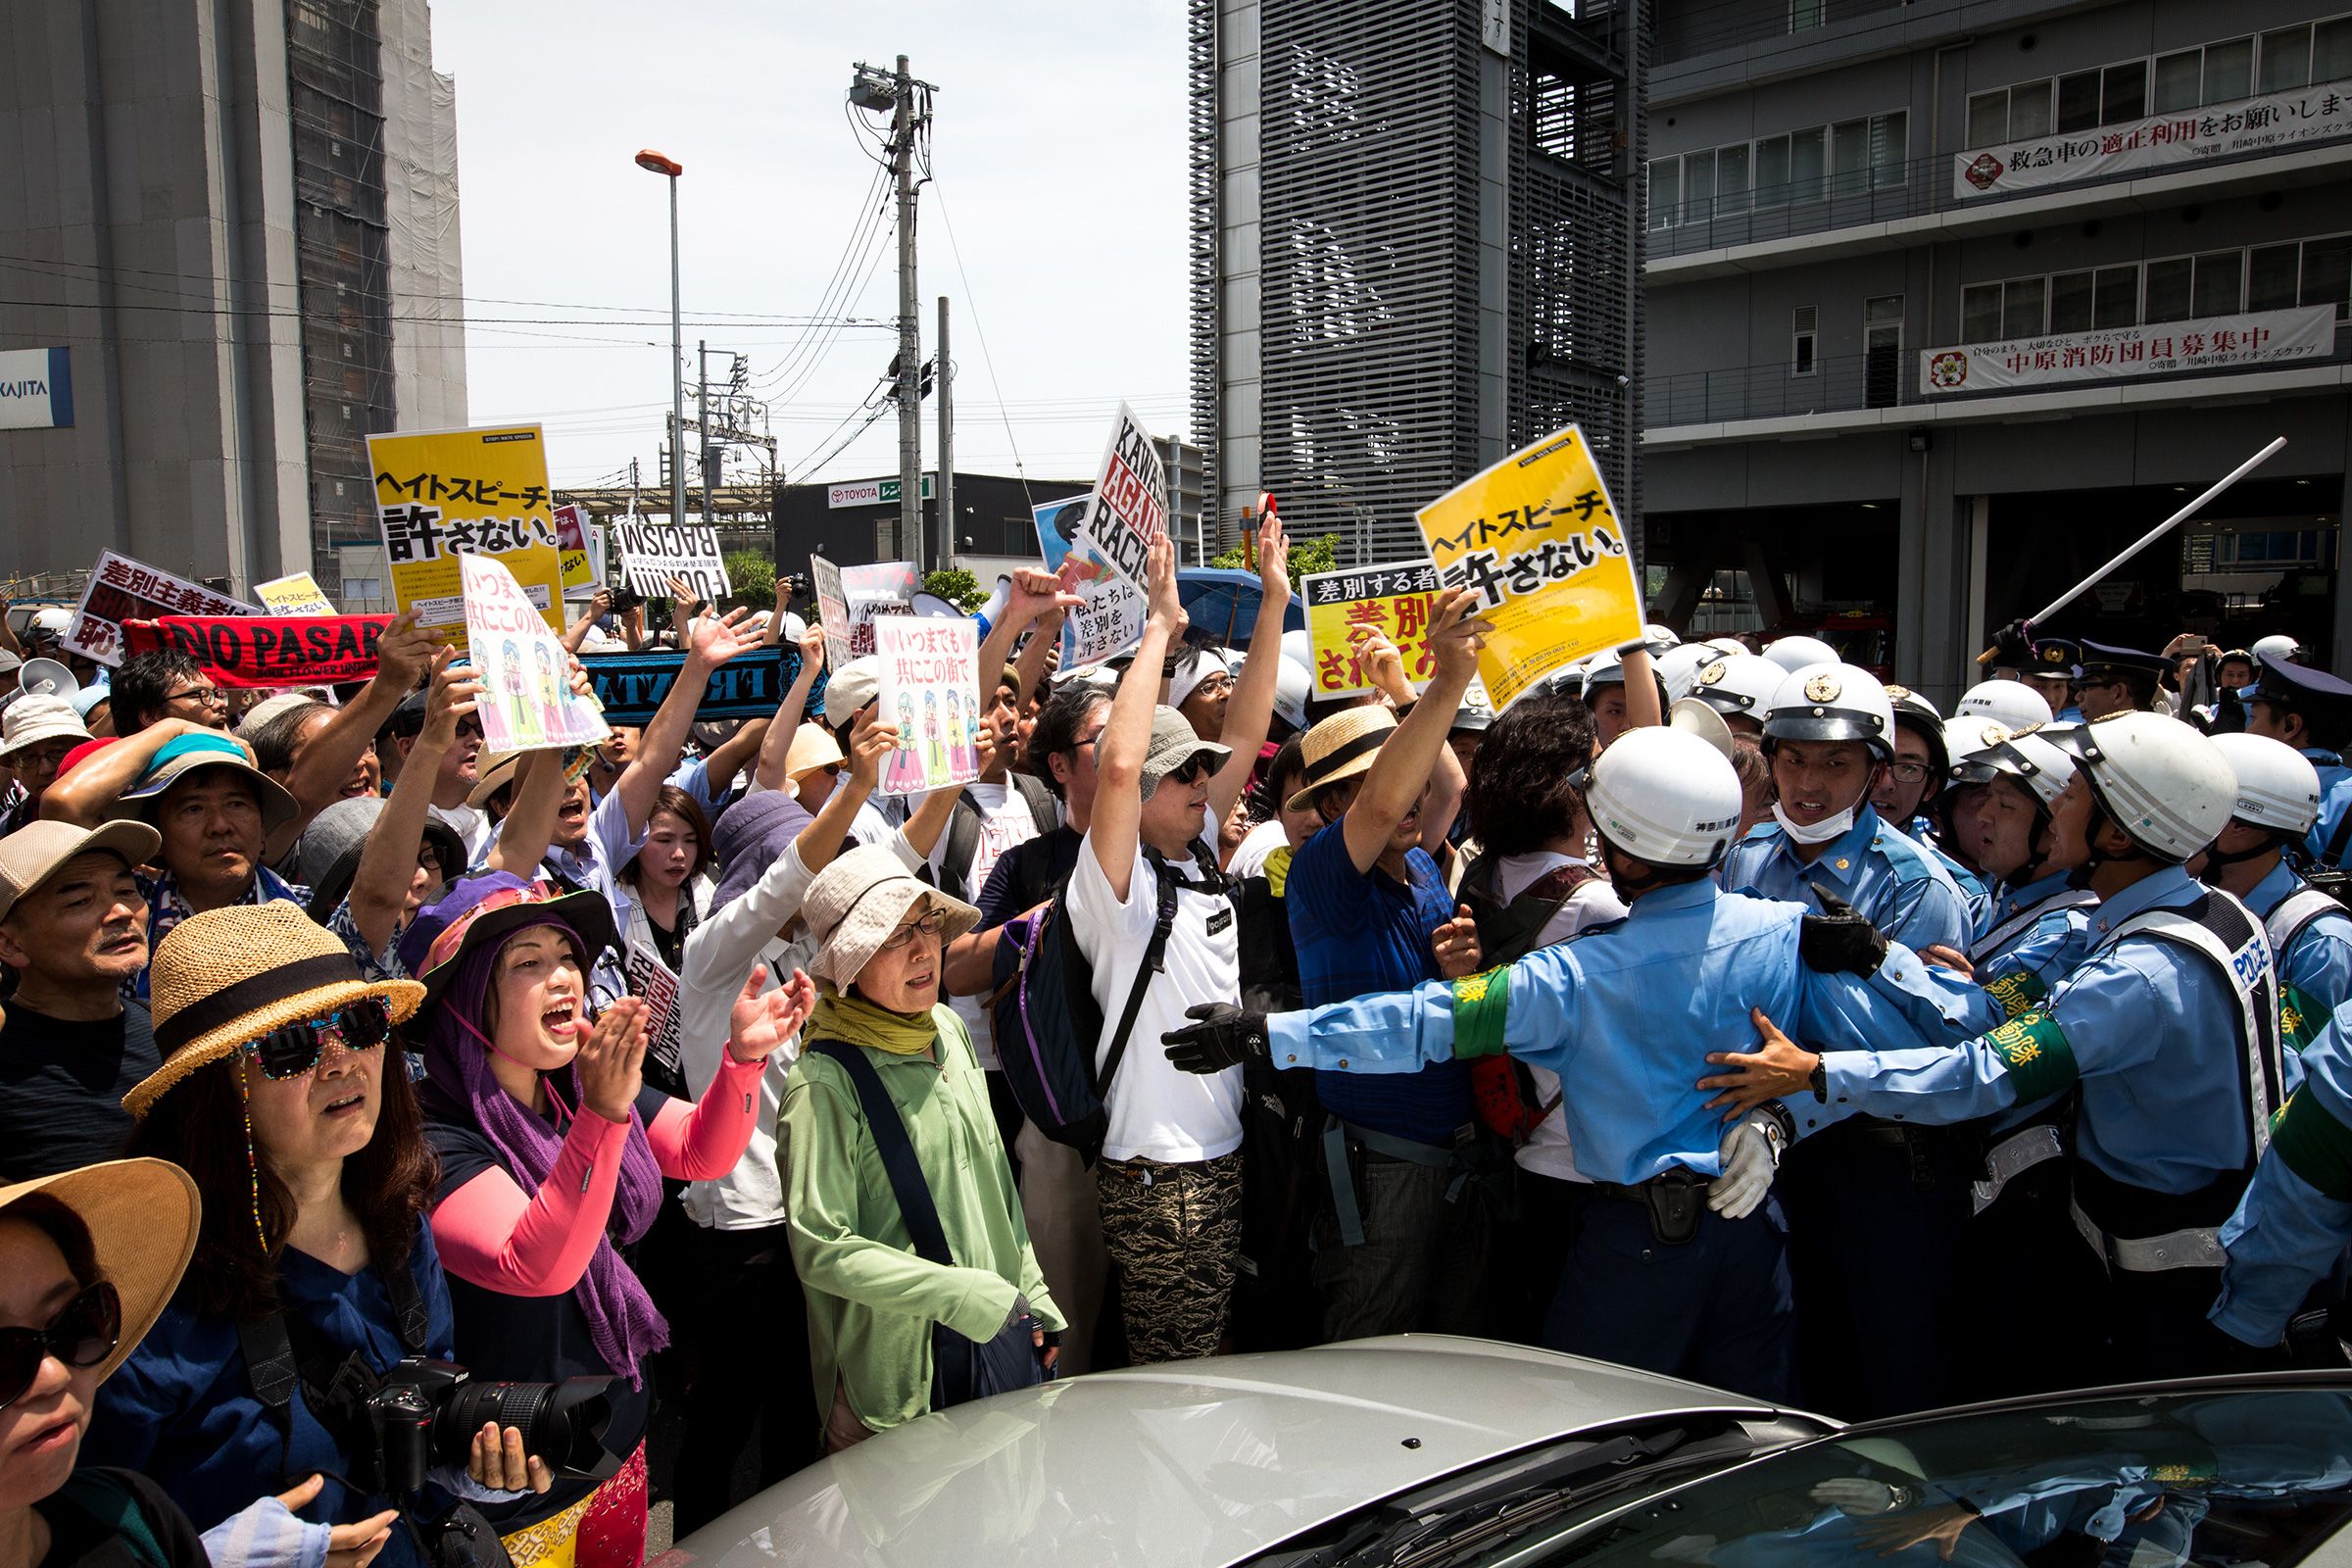 Anti-racist groups (L) try to block Japanese nationalists from marching on the street during a rally demanding an end to hate speech in Kawasaki, Japan, on July 16, 2017. Scuffles erupted when right-wing activists marched with their slogans, flags, and racist speech, forcing police to intervene. (Richard Atrero de Guzman—NurPhoto/Getty Images)